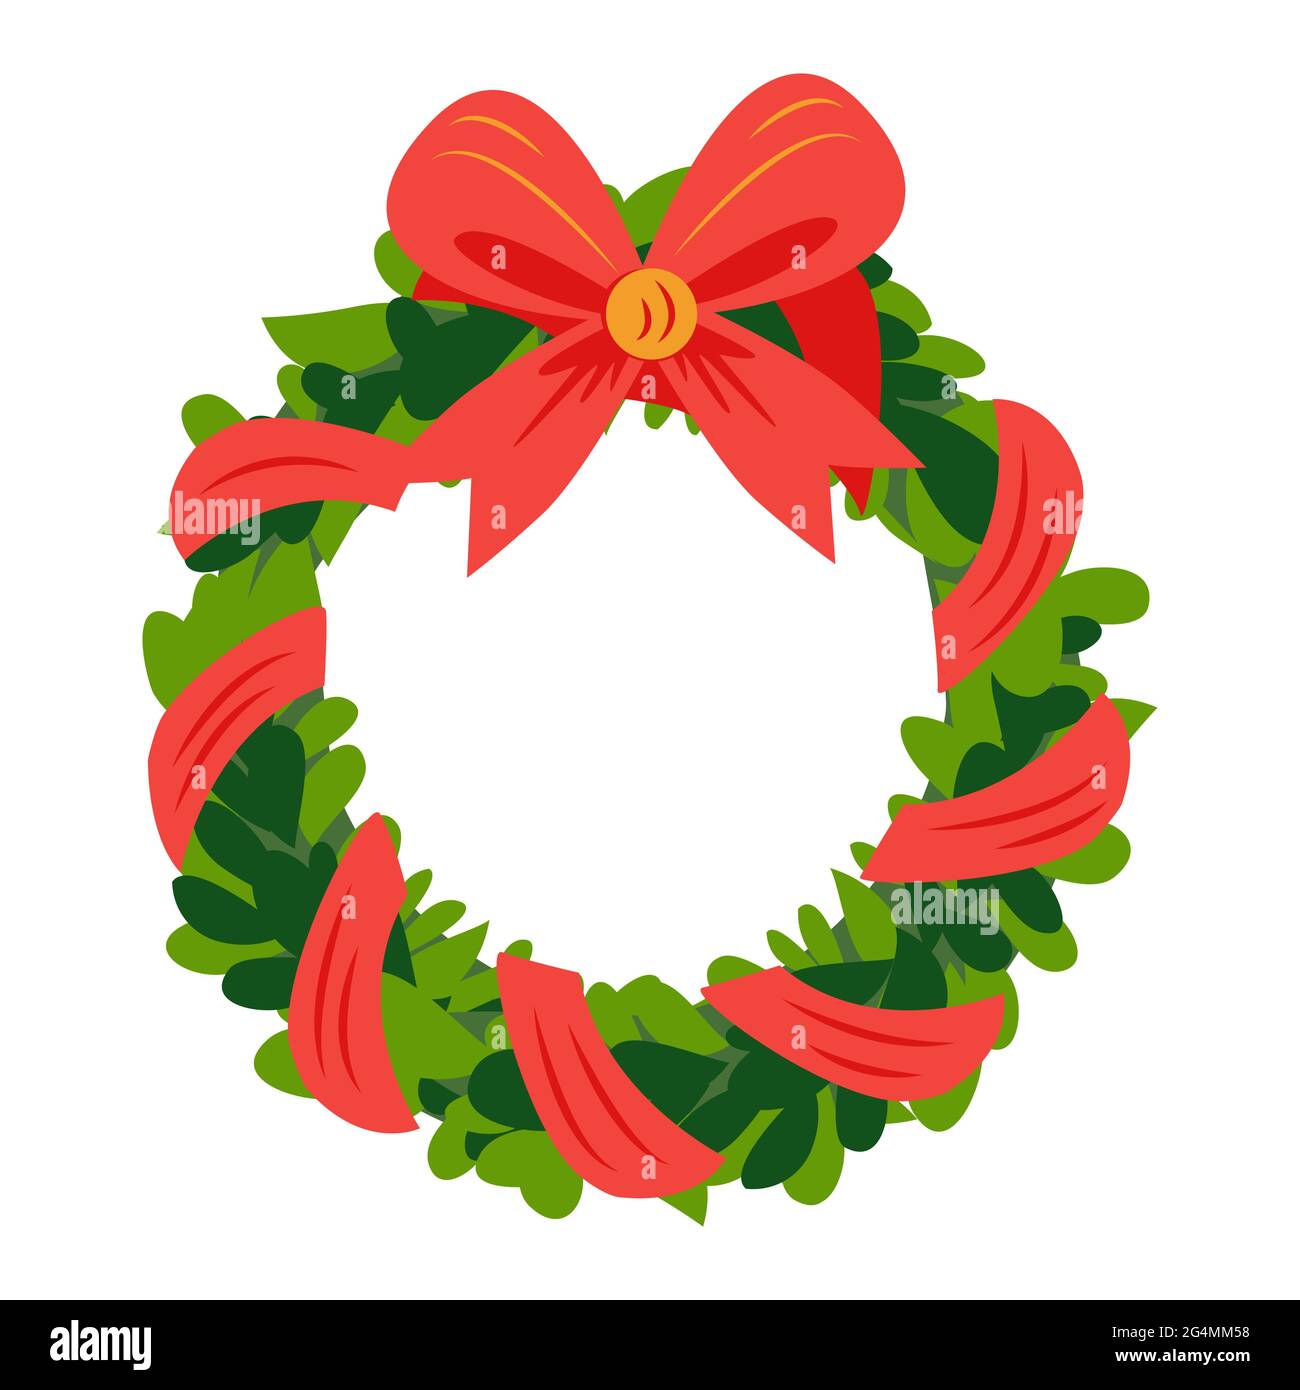 Christmas Wreath with ribbons, balls and bow. Christmas wreath of holly with red berries. New Year holiday celebration in December Stock Vector